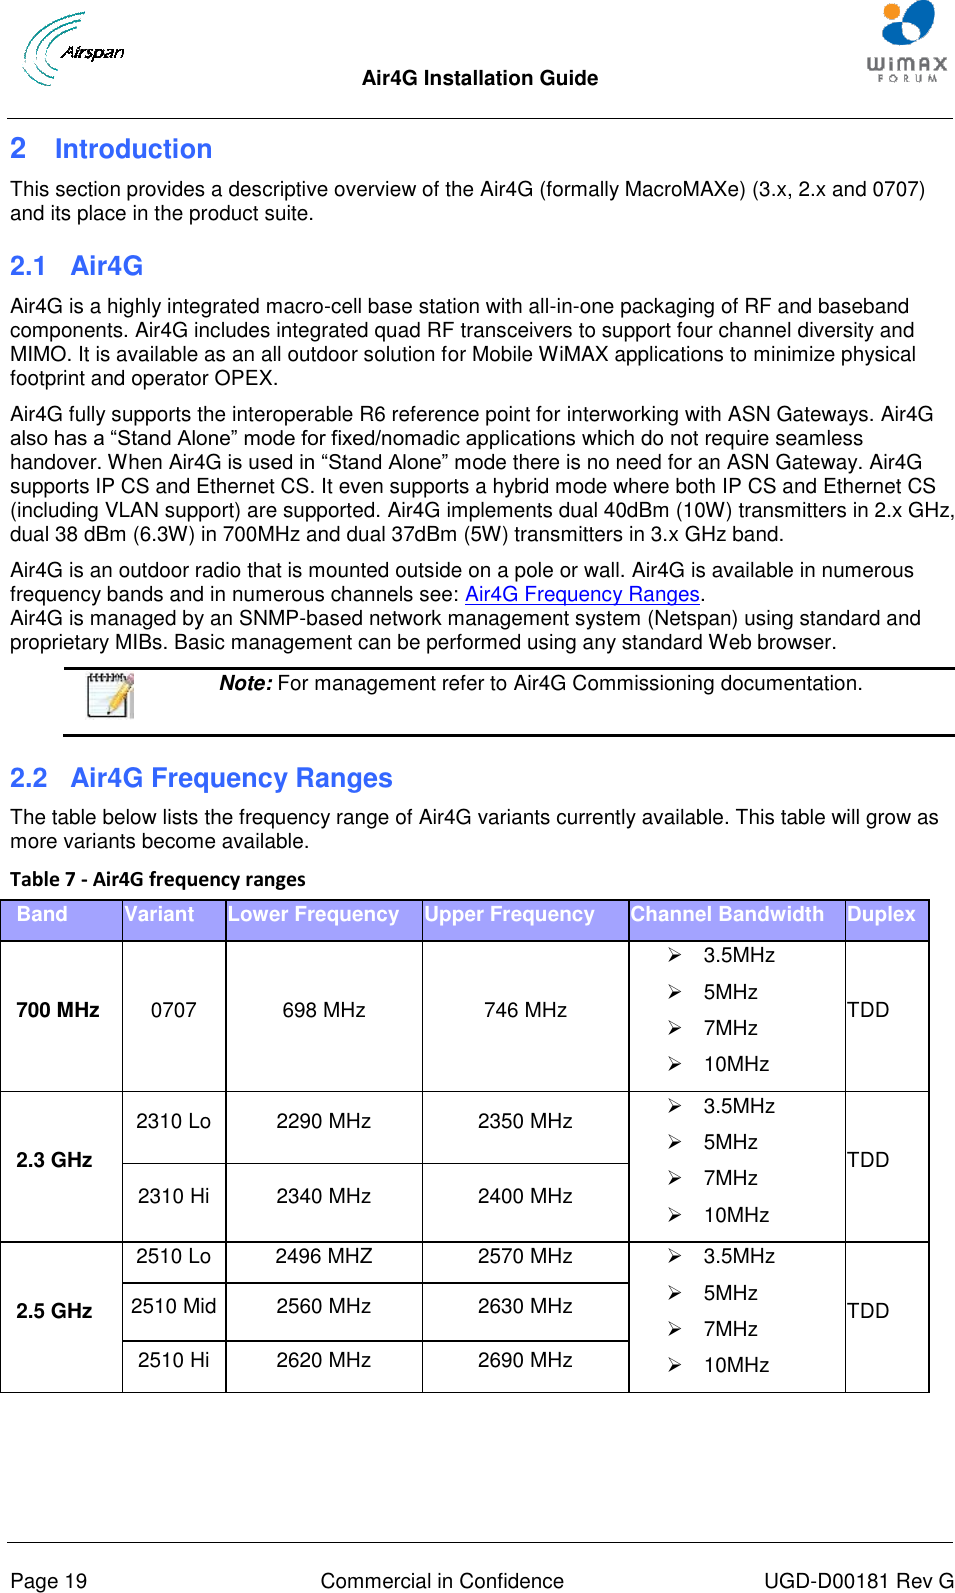  Air4G Installation Guide       Page 19  Commercial in Confidence  UGD-D00181 Rev G 2  Introduction This section provides a descriptive overview of the Air4G (formally MacroMAXe) (3.x, 2.x and 0707) and its place in the product suite. 2.1  Air4G Air4G is a highly integrated macro-cell base station with all-in-one packaging of RF and baseband components. Air4G includes integrated quad RF transceivers to support four channel diversity and MIMO. It is available as an all outdoor solution for Mobile WiMAX applications to minimize physical footprint and operator OPEX. Air4G fully supports the interoperable R6 reference point for interworking with ASN Gateways. Air4G also has a “Stand Alone” mode for fixed/nomadic applications which do not require seamless handover. When Air4G is used in “Stand Alone” mode there is no need for an ASN Gateway. Air4G supports IP CS and Ethernet CS. It even supports a hybrid mode where both IP CS and Ethernet CS (including VLAN support) are supported. Air4G implements dual 40dBm (10W) transmitters in 2.x GHz, dual 38 dBm (6.3W) in 700MHz and dual 37dBm (5W) transmitters in 3.x GHz band. Air4G is an outdoor radio that is mounted outside on a pole or wall. Air4G is available in numerous frequency bands and in numerous channels see: Air4G Frequency Ranges.Air4G is managed by an SNMP-based network management system (Netspan) using standard and proprietary MIBs. Basic management can be performed using any standard Web browser.  Note: For management refer to Air4G Commissioning documentation. 2.2  Air4G Frequency Ranges The table below lists the frequency range of Air4G variants currently available. This table will grow as more variants become available. Table 7 - Air4G frequency ranges Band Variant Lower Frequency Upper Frequency Channel Bandwidth Duplex 700 MHz 0707 698 MHz 746 MHz   3.5MHz   5MHz   7MHz   10MHz TDD 2.3 GHz 2310 Lo 2290 MHz 2350 MHz   3.5MHz   5MHz   7MHz   10MHz TDD 2310 Hi 2340 MHz 2400 MHz 2.5 GHz 2510 Lo 2496 MHZ 2570 MHz   3.5MHz   5MHz   7MHz   10MHz TDD 2510 Mid 2560 MHz 2630 MHz 2510 Hi 2620 MHz 2690 MHz 